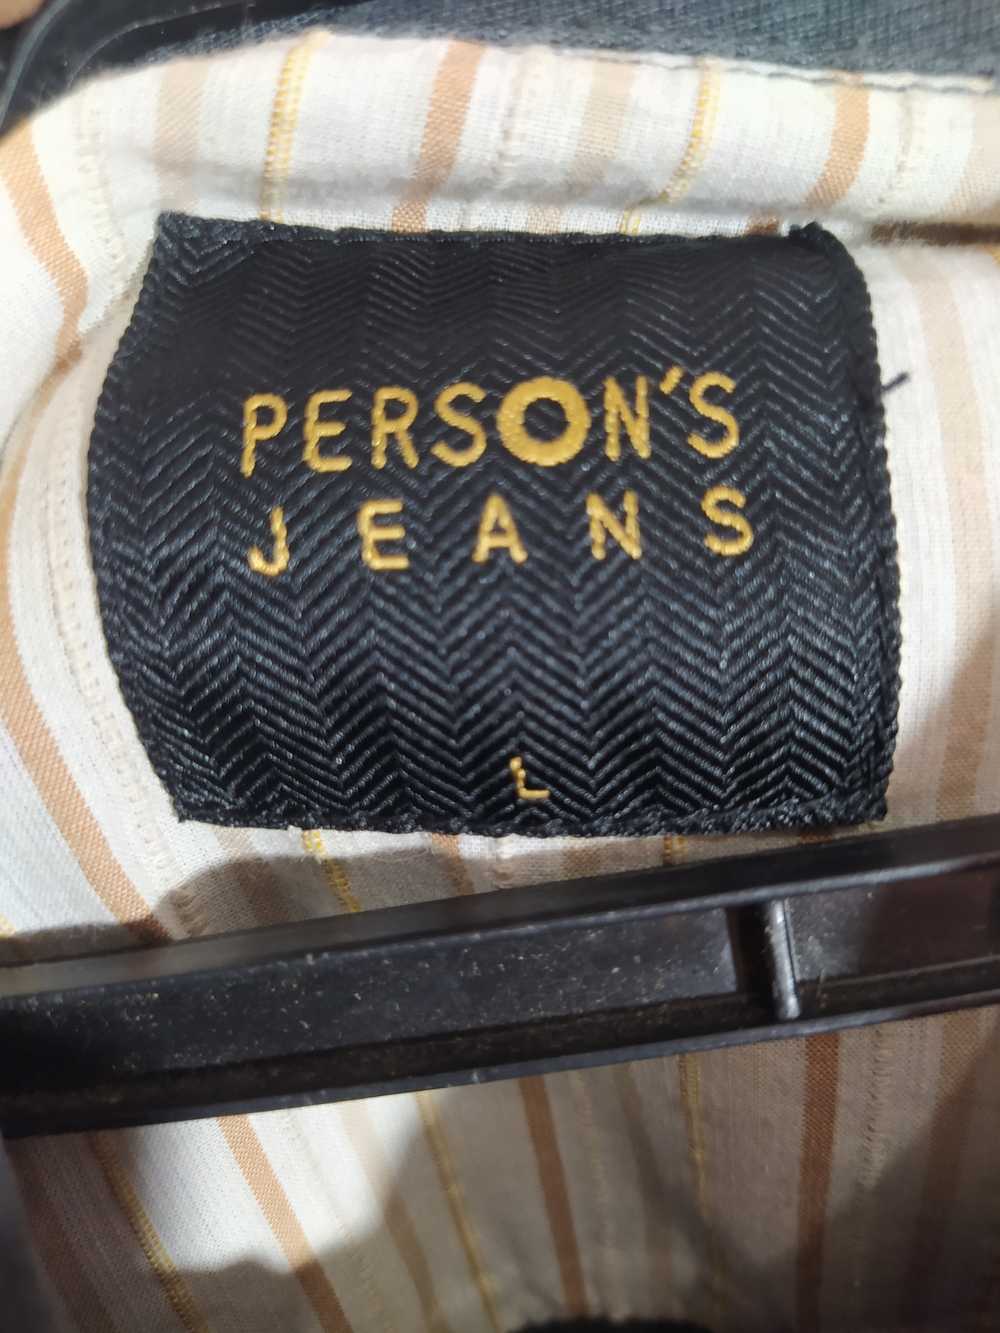 Japanese Brand × Person's × Vintage Vintage perso… - image 3